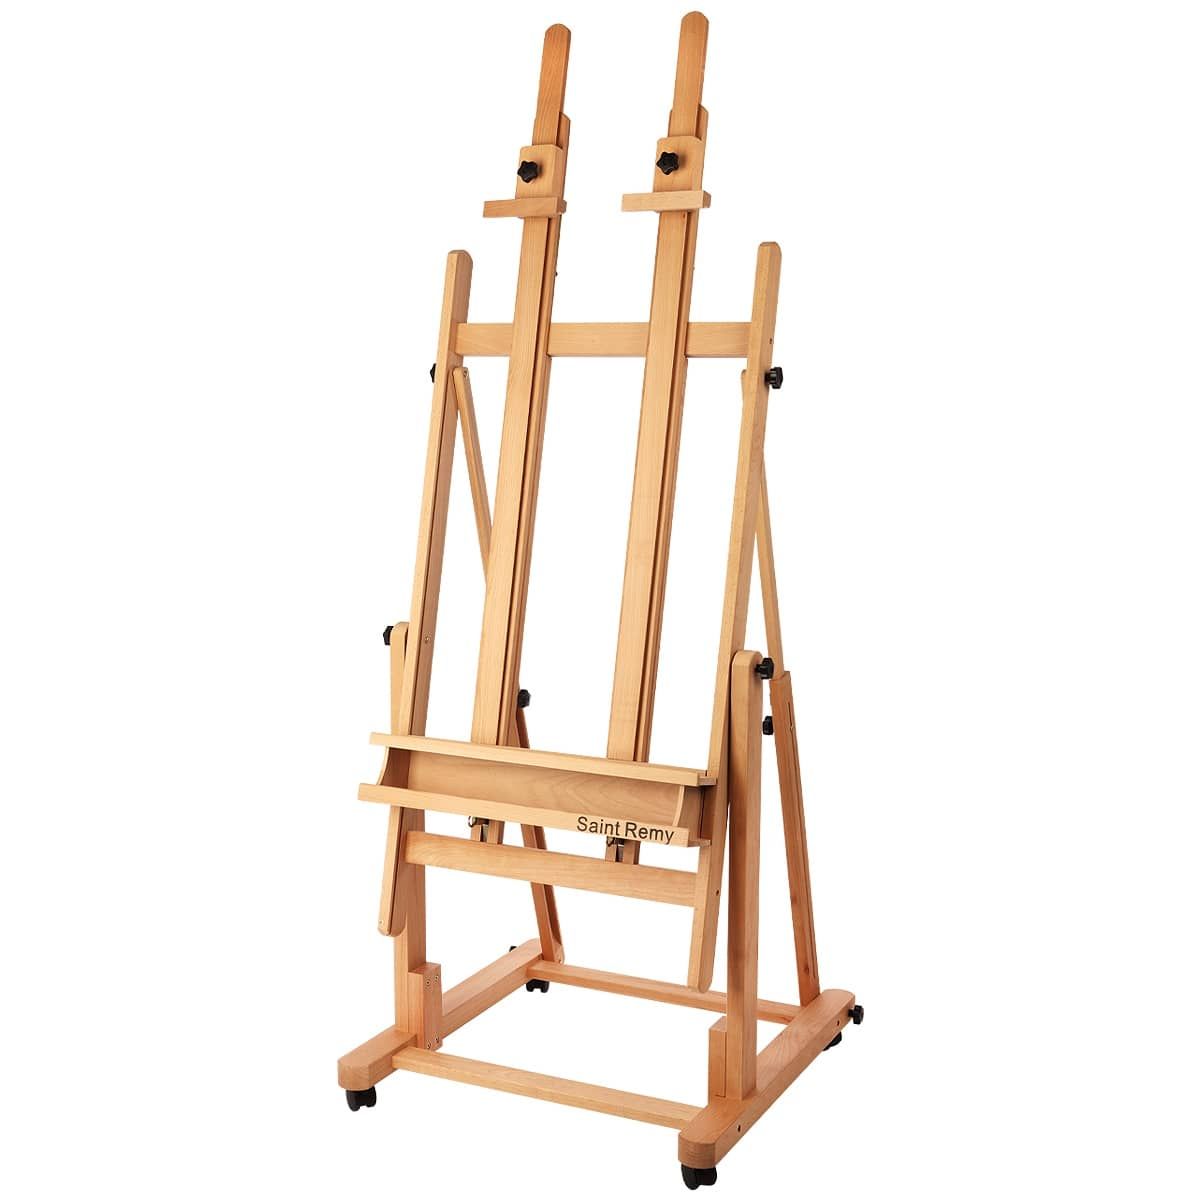 Instant Display Easel Stand - 61 Tripod Collapsible Portable Artist Floor  Easel